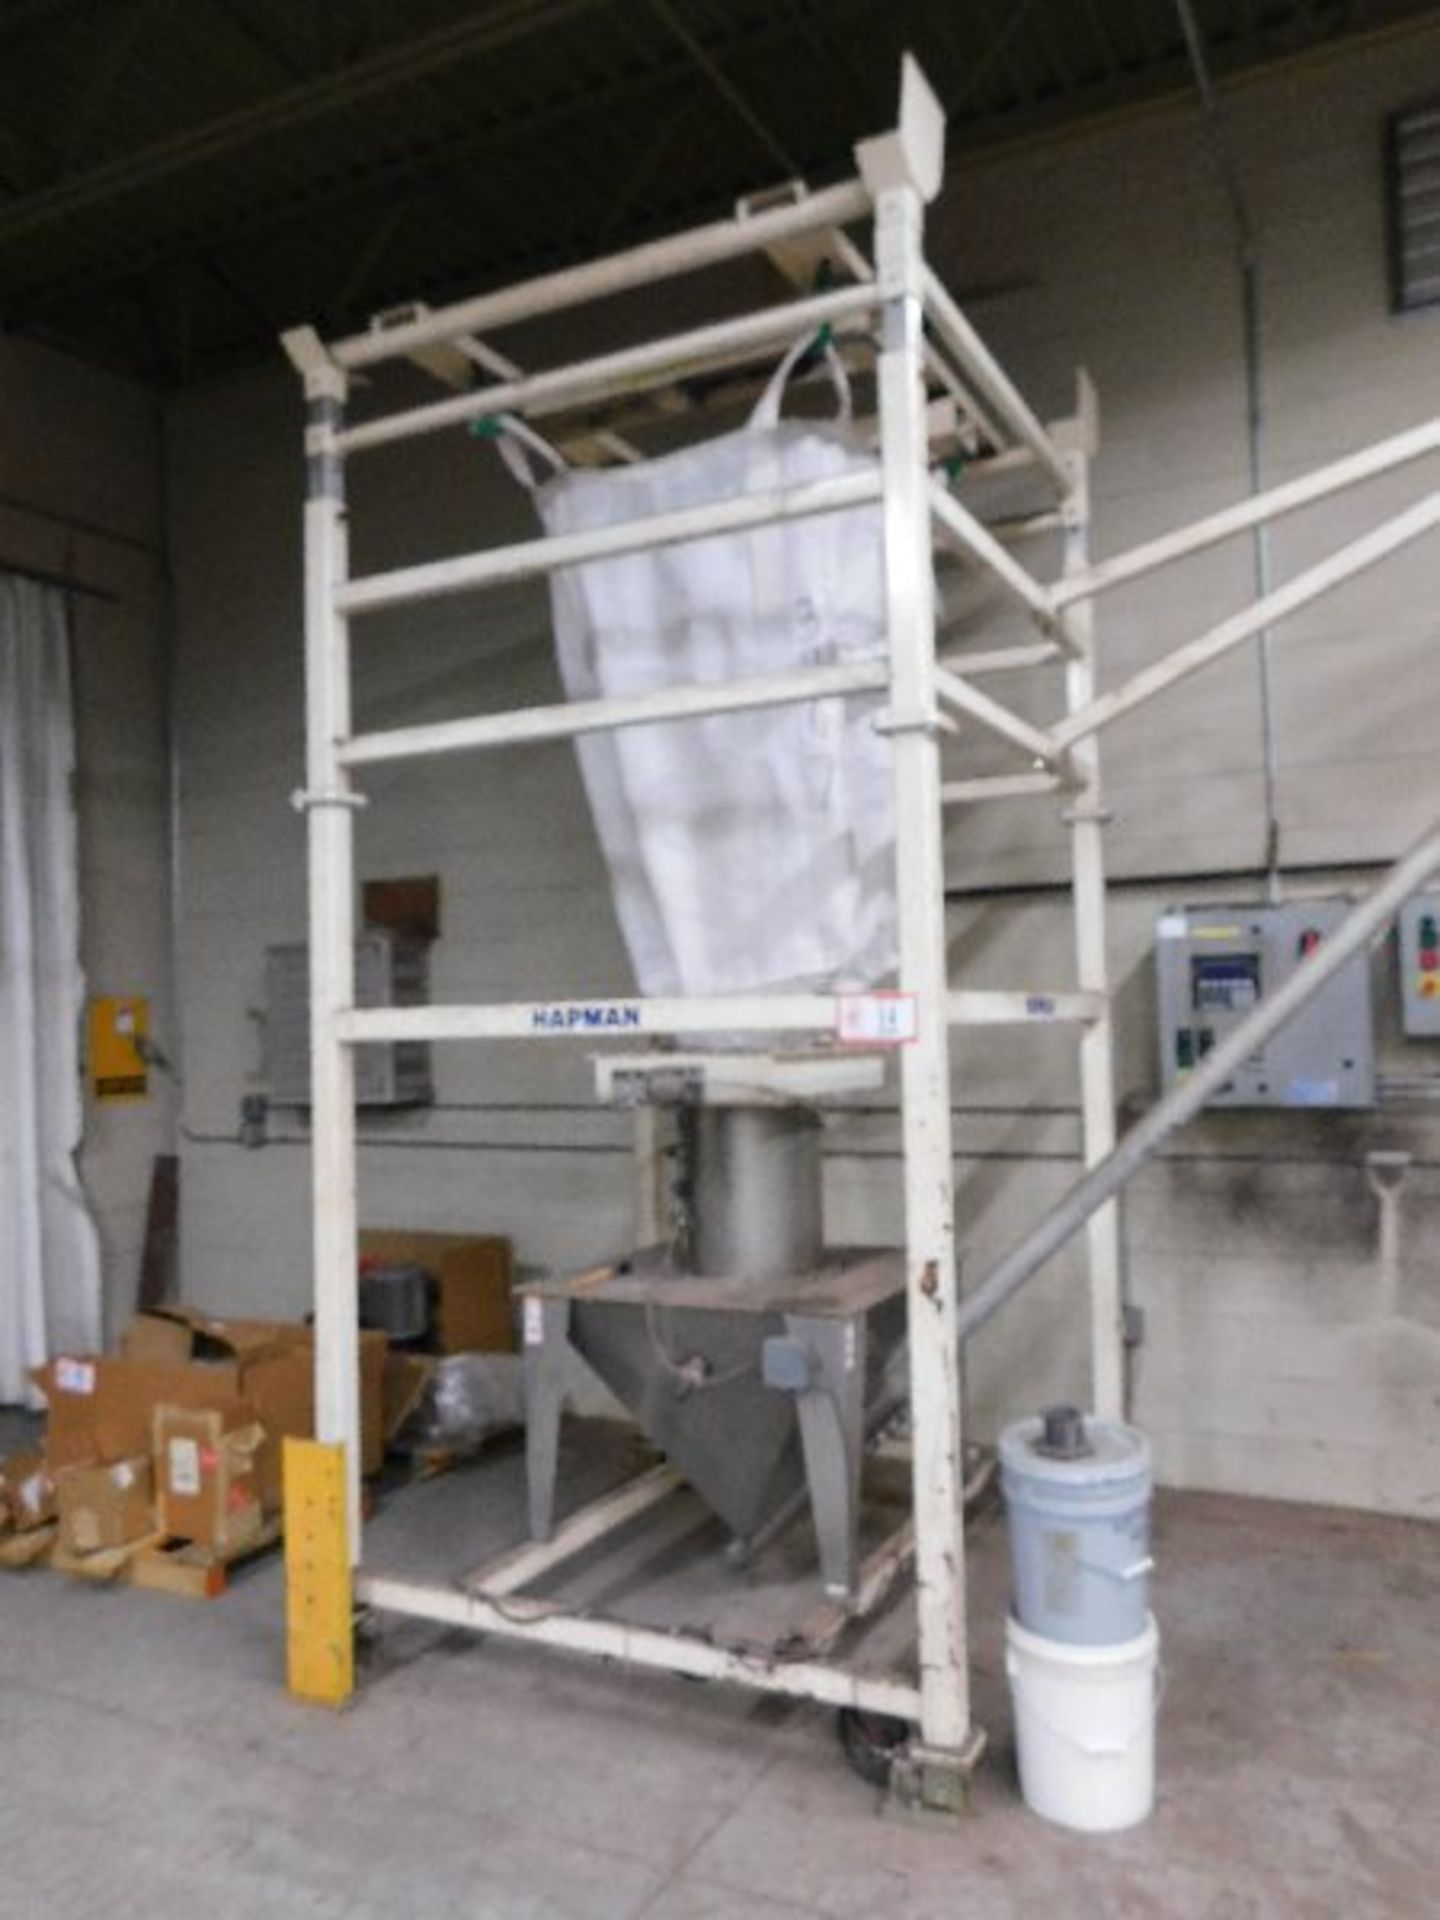 Hapman Scale Bagging System, W/12' Auger, (4) Load Cells, Hapman Control Panel and Bag